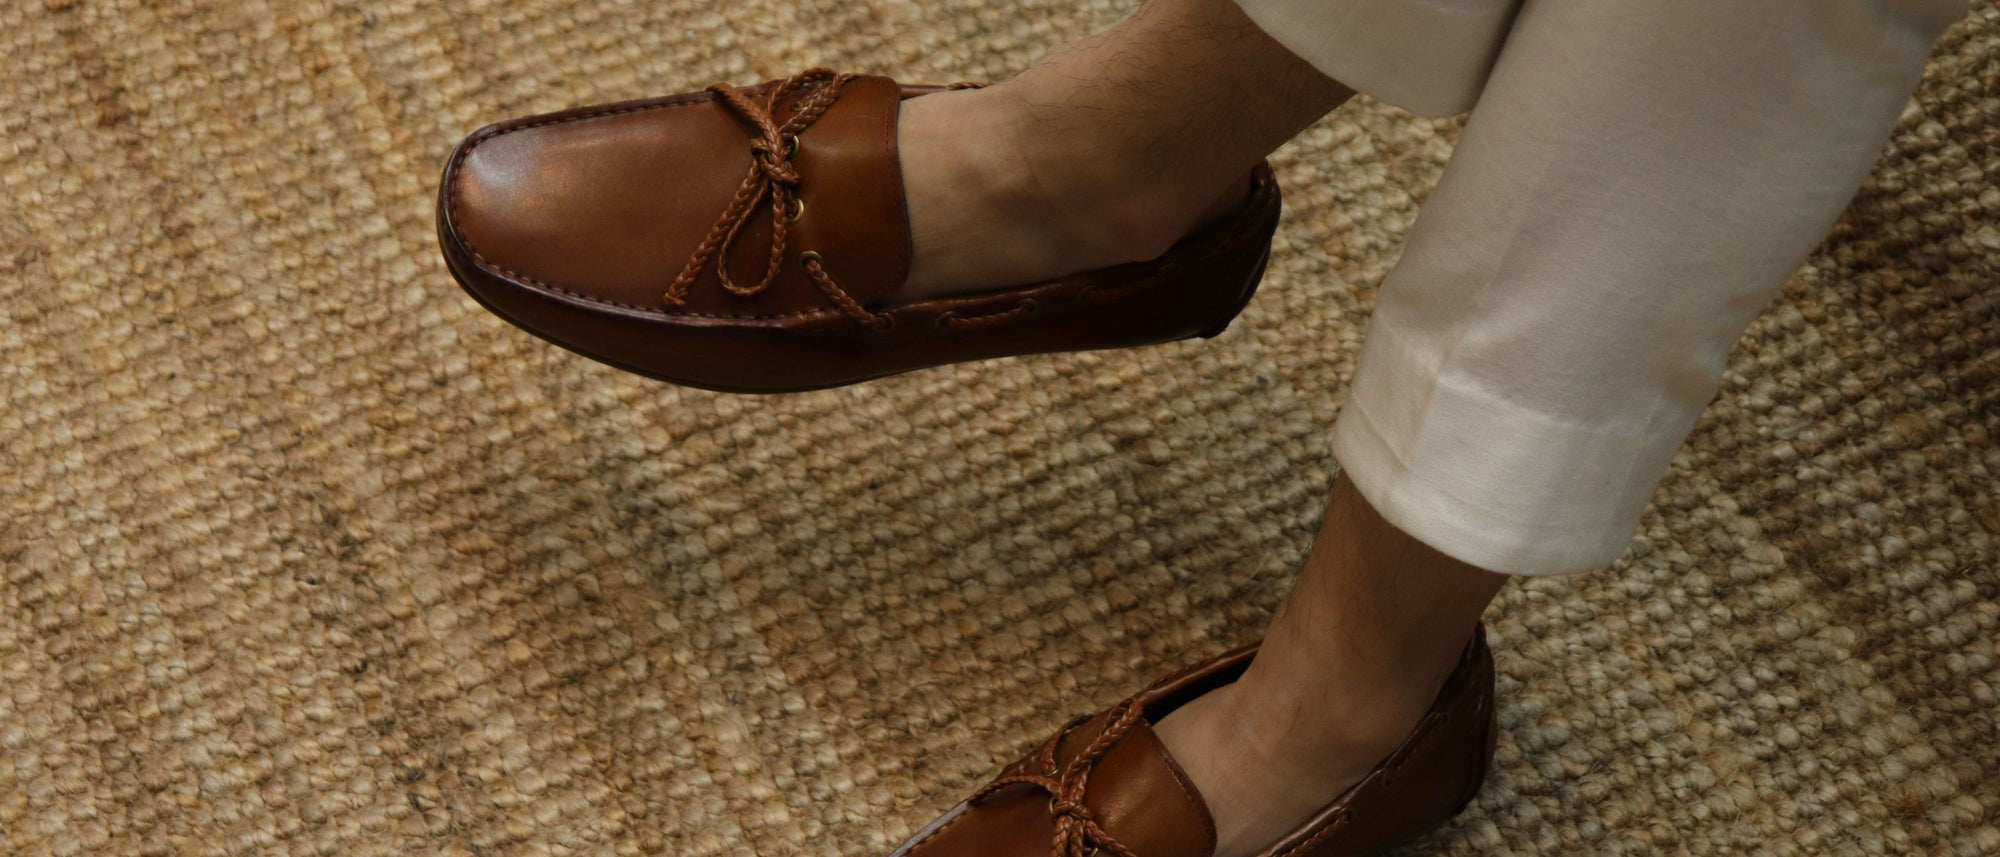 A Definitive Guide to Moccasins